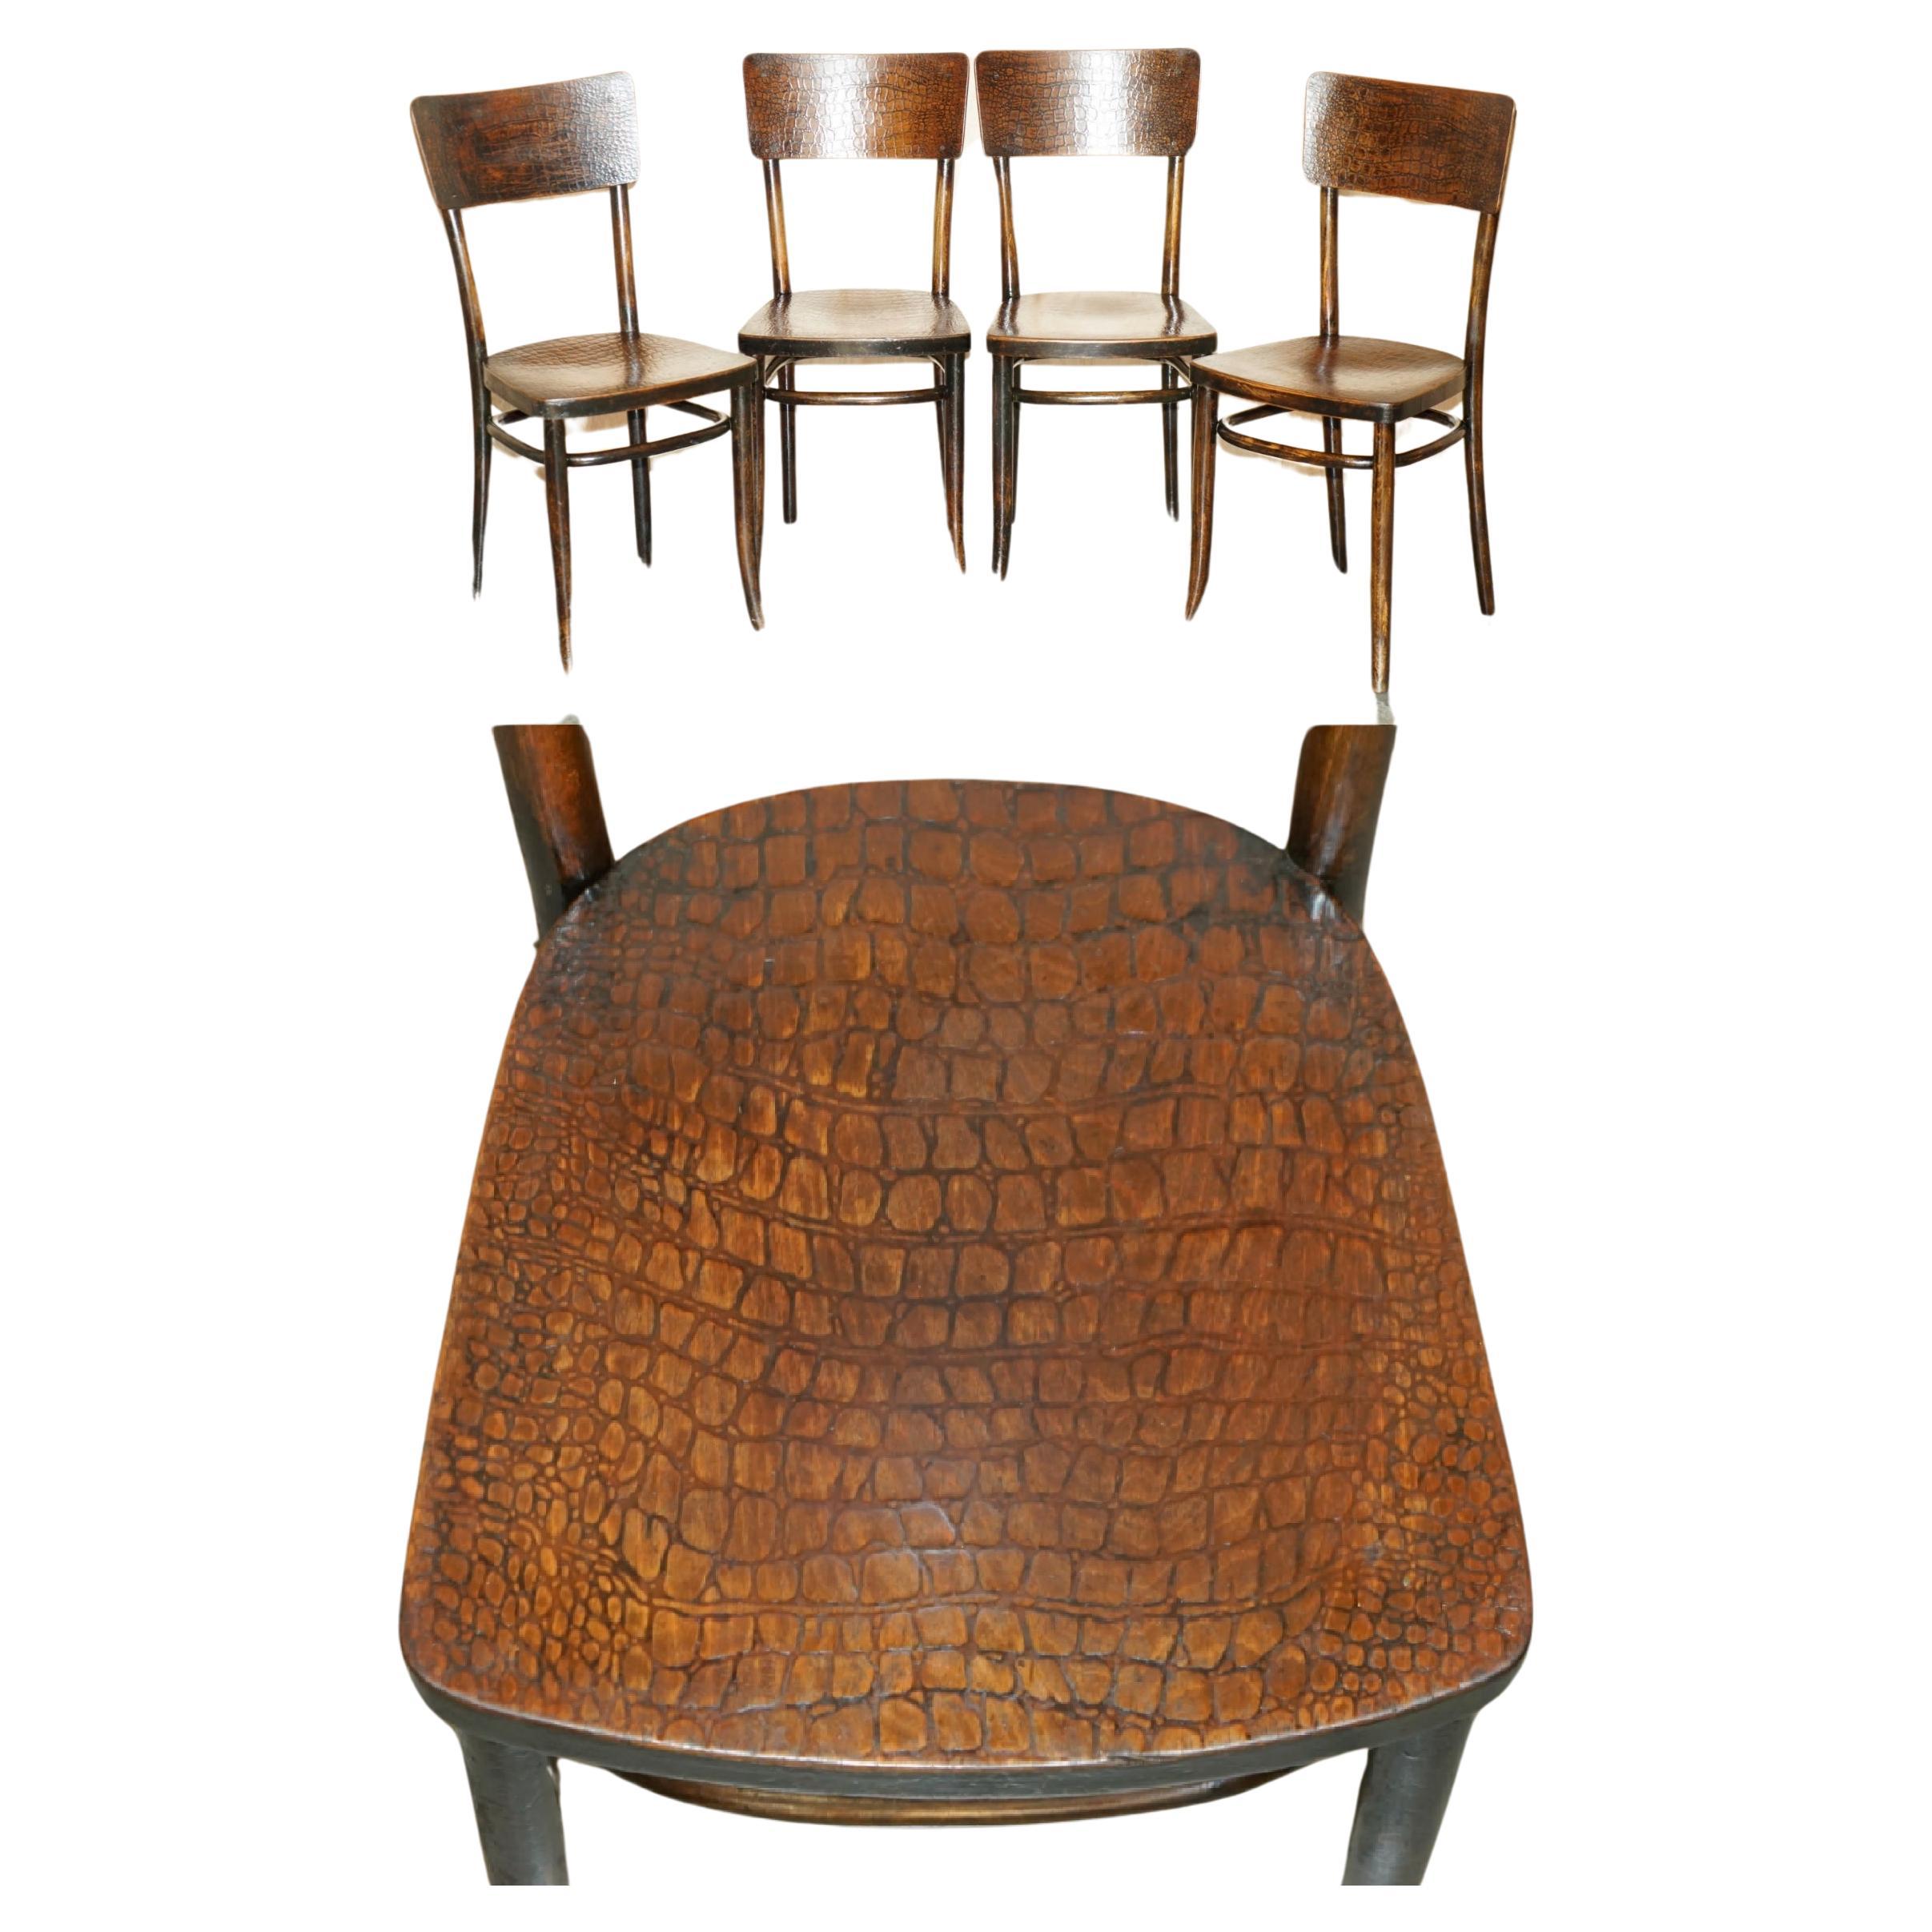 FOUR FiNE ANTIQUE THONET CROCODILE ALLIGATOR CARVED WOOD PATINA DINING CHAIRS 4 For Sale